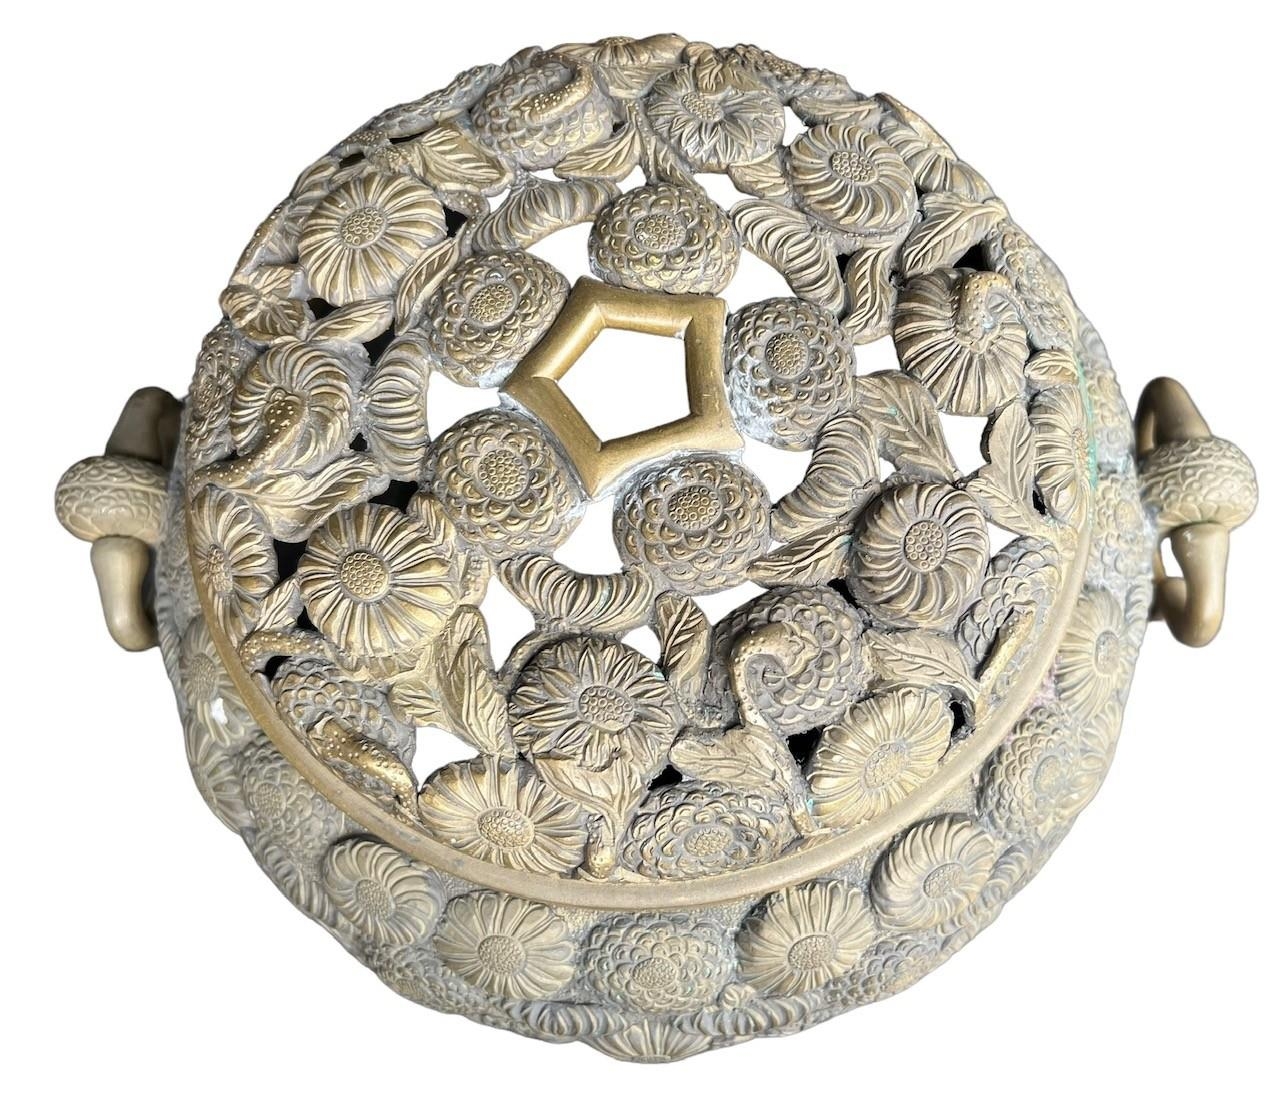 A LARGE JAPANESE MEIJI PERIOD BRONZE KORO AND COVER Decorated with sixteenth petal chrysanthemum - Image 6 of 8